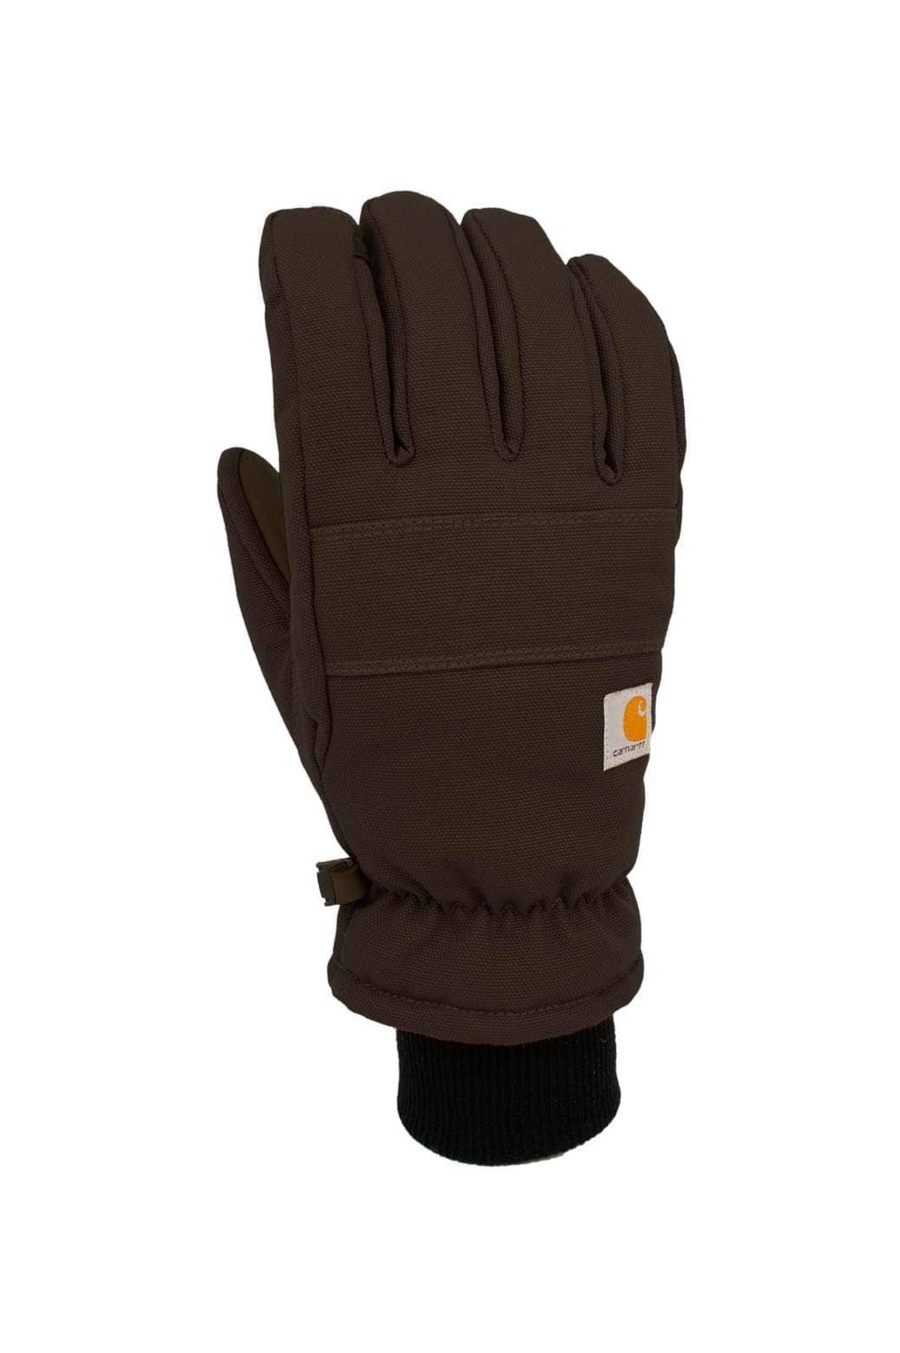 CARHARTT WOMEN'S INSULATED DUCK/SYNTHETIC LEATHER KNIT CUFF GLOVE GL0781W